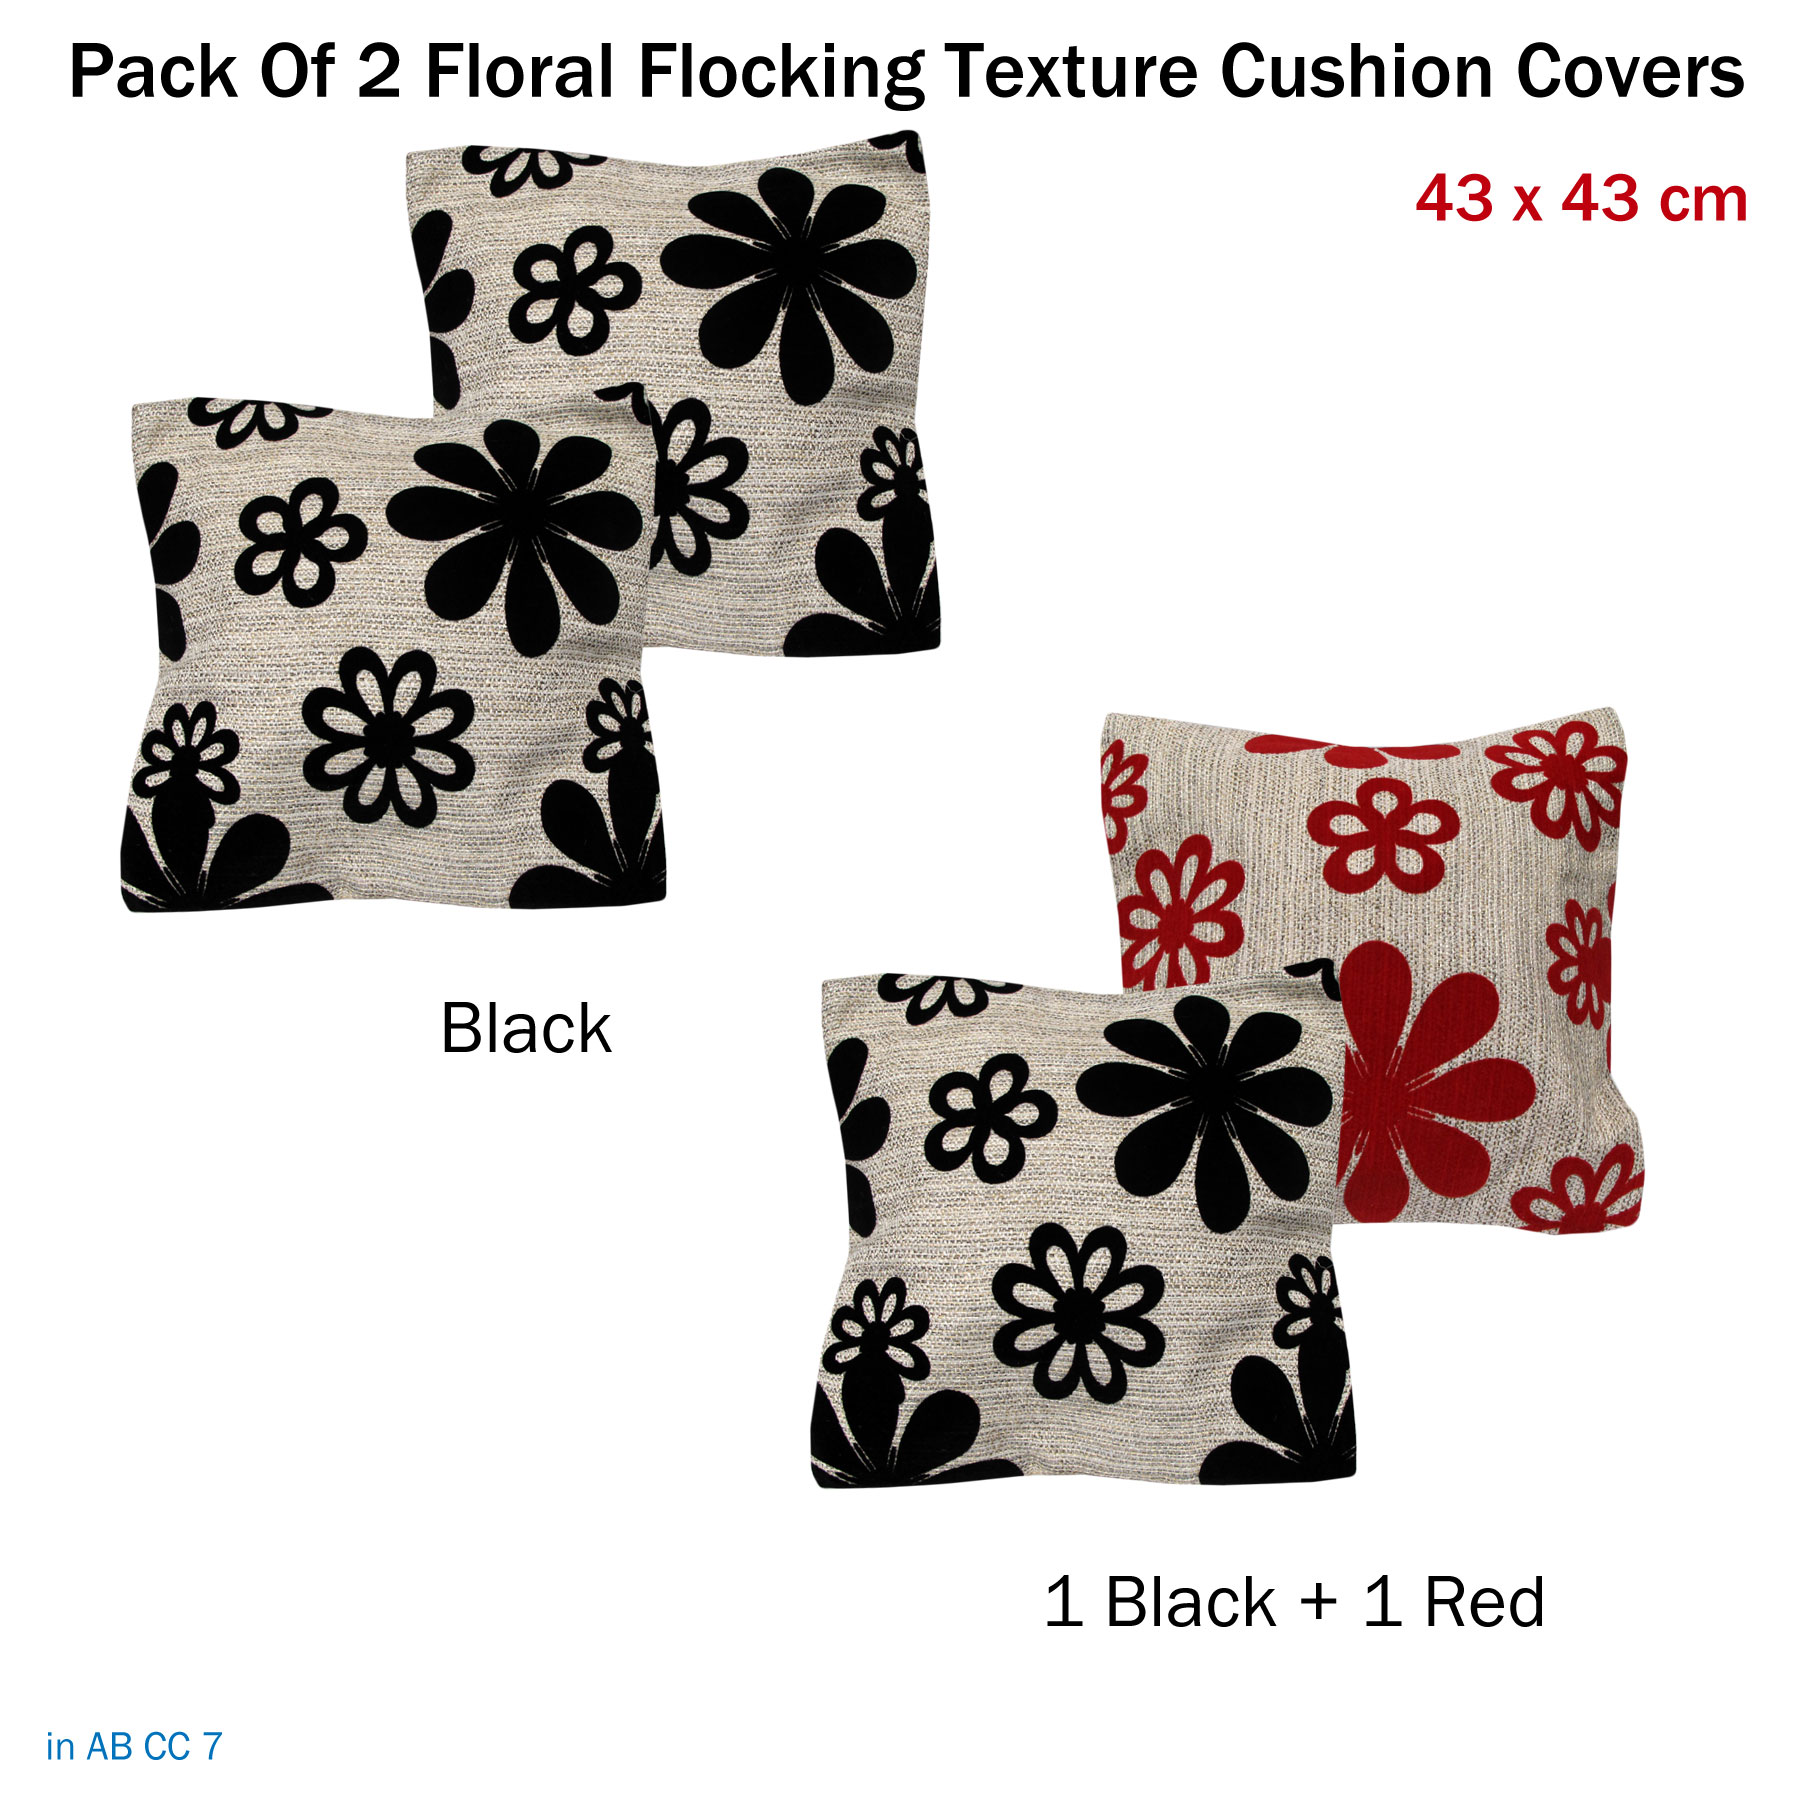 Pack of 2 - Floral Flocking Texture Living Bedroom Square Cushion Cover 43 x 43 cm